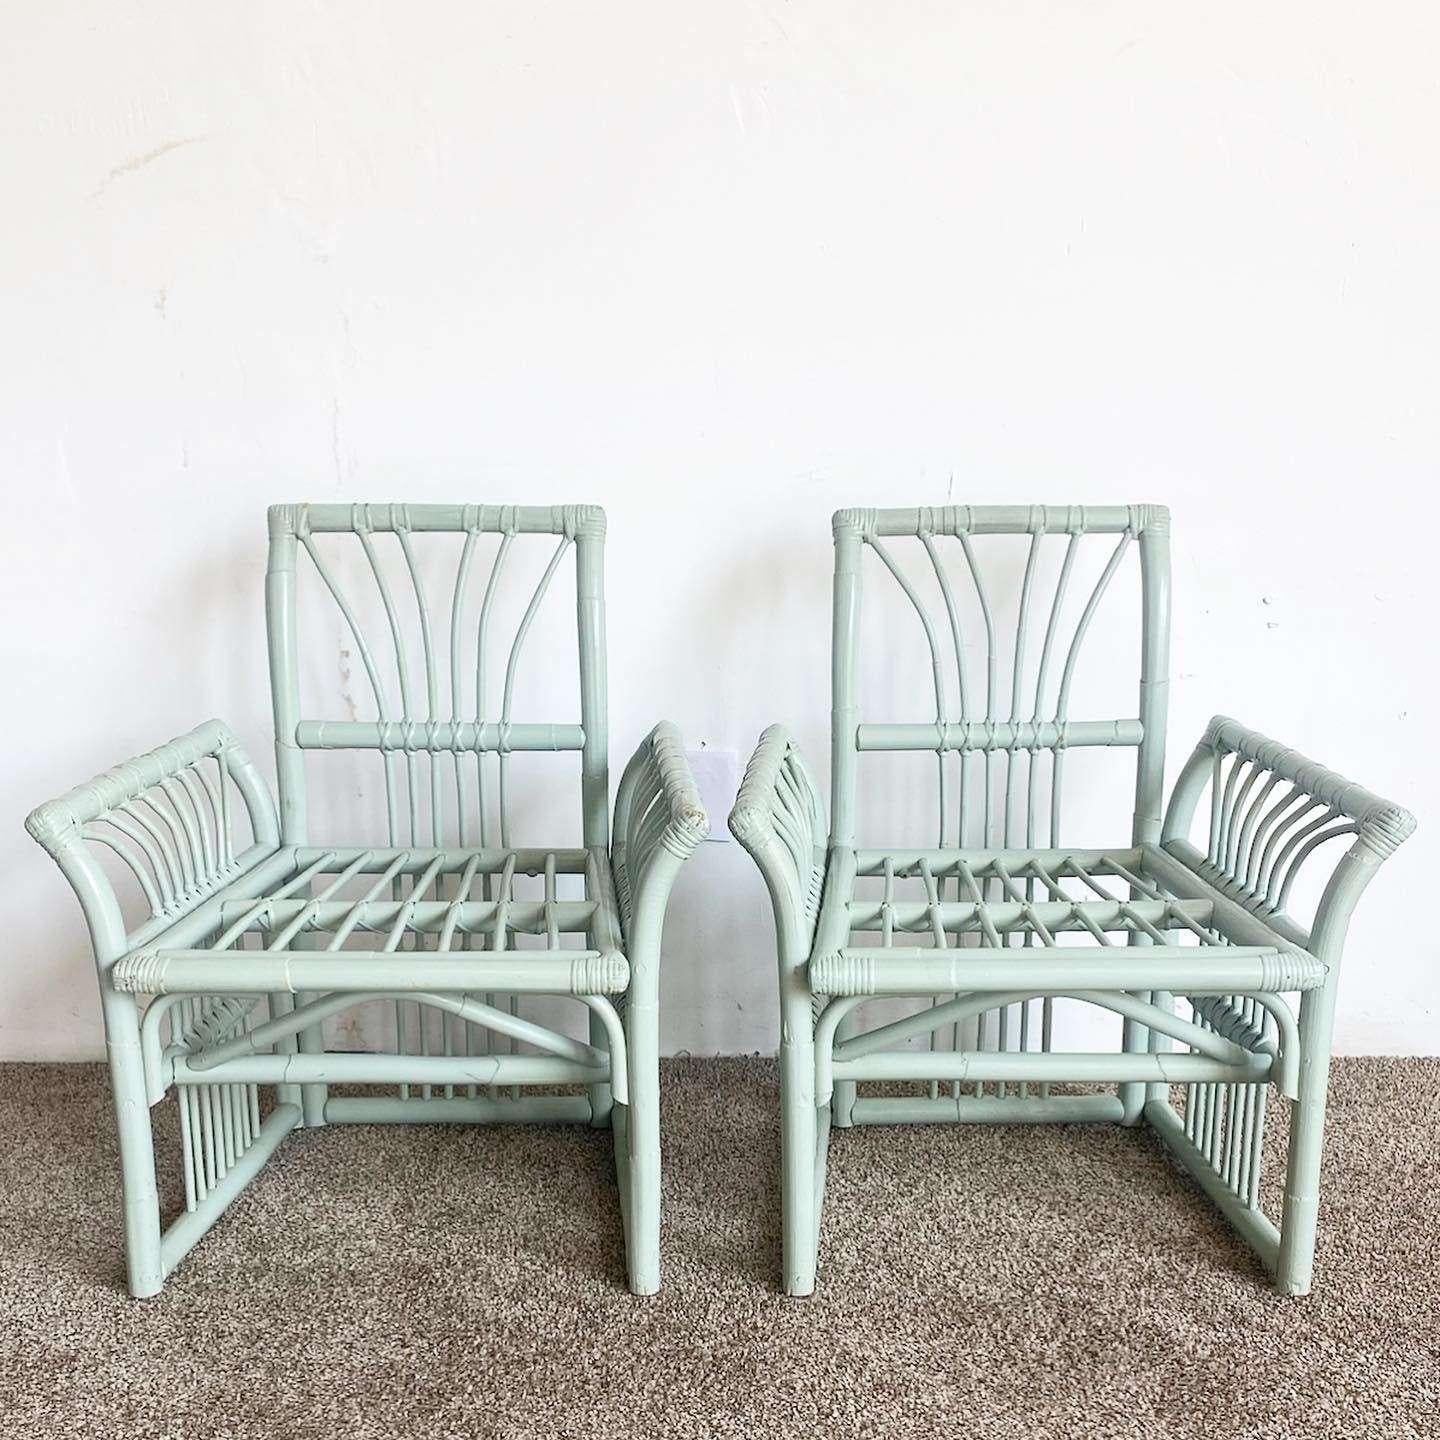 Bohemian Boho Chic Mint Green Bamboo Rattan Dining Set - 5 Pieces For Sale